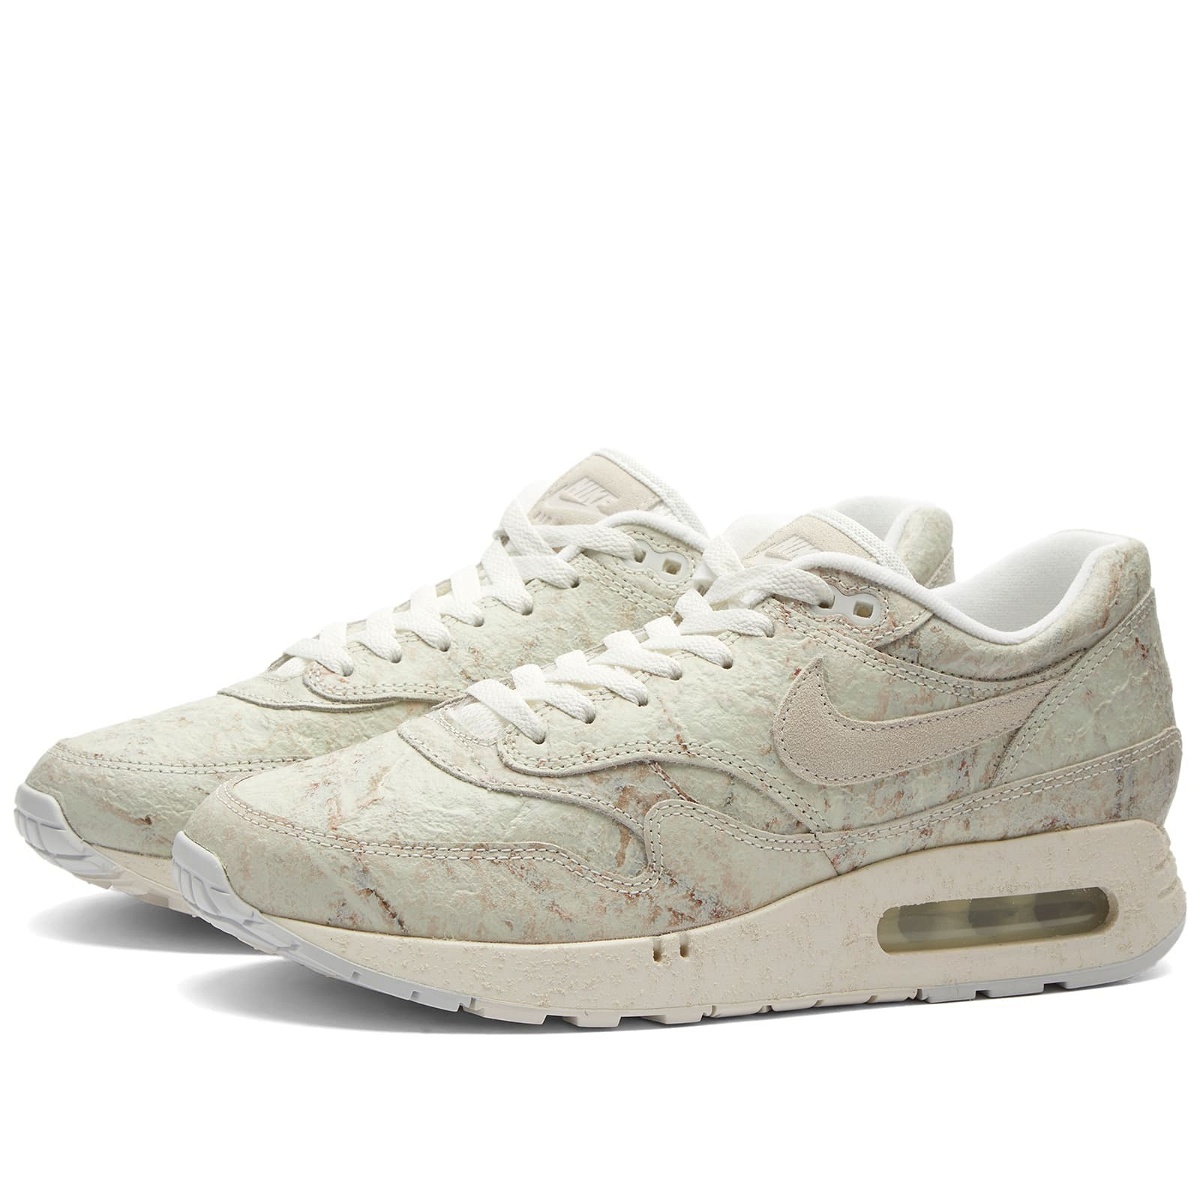 Photo: Nike Air Max 1 '86 OG Sneakers in Summit White/Photon Dust/Black